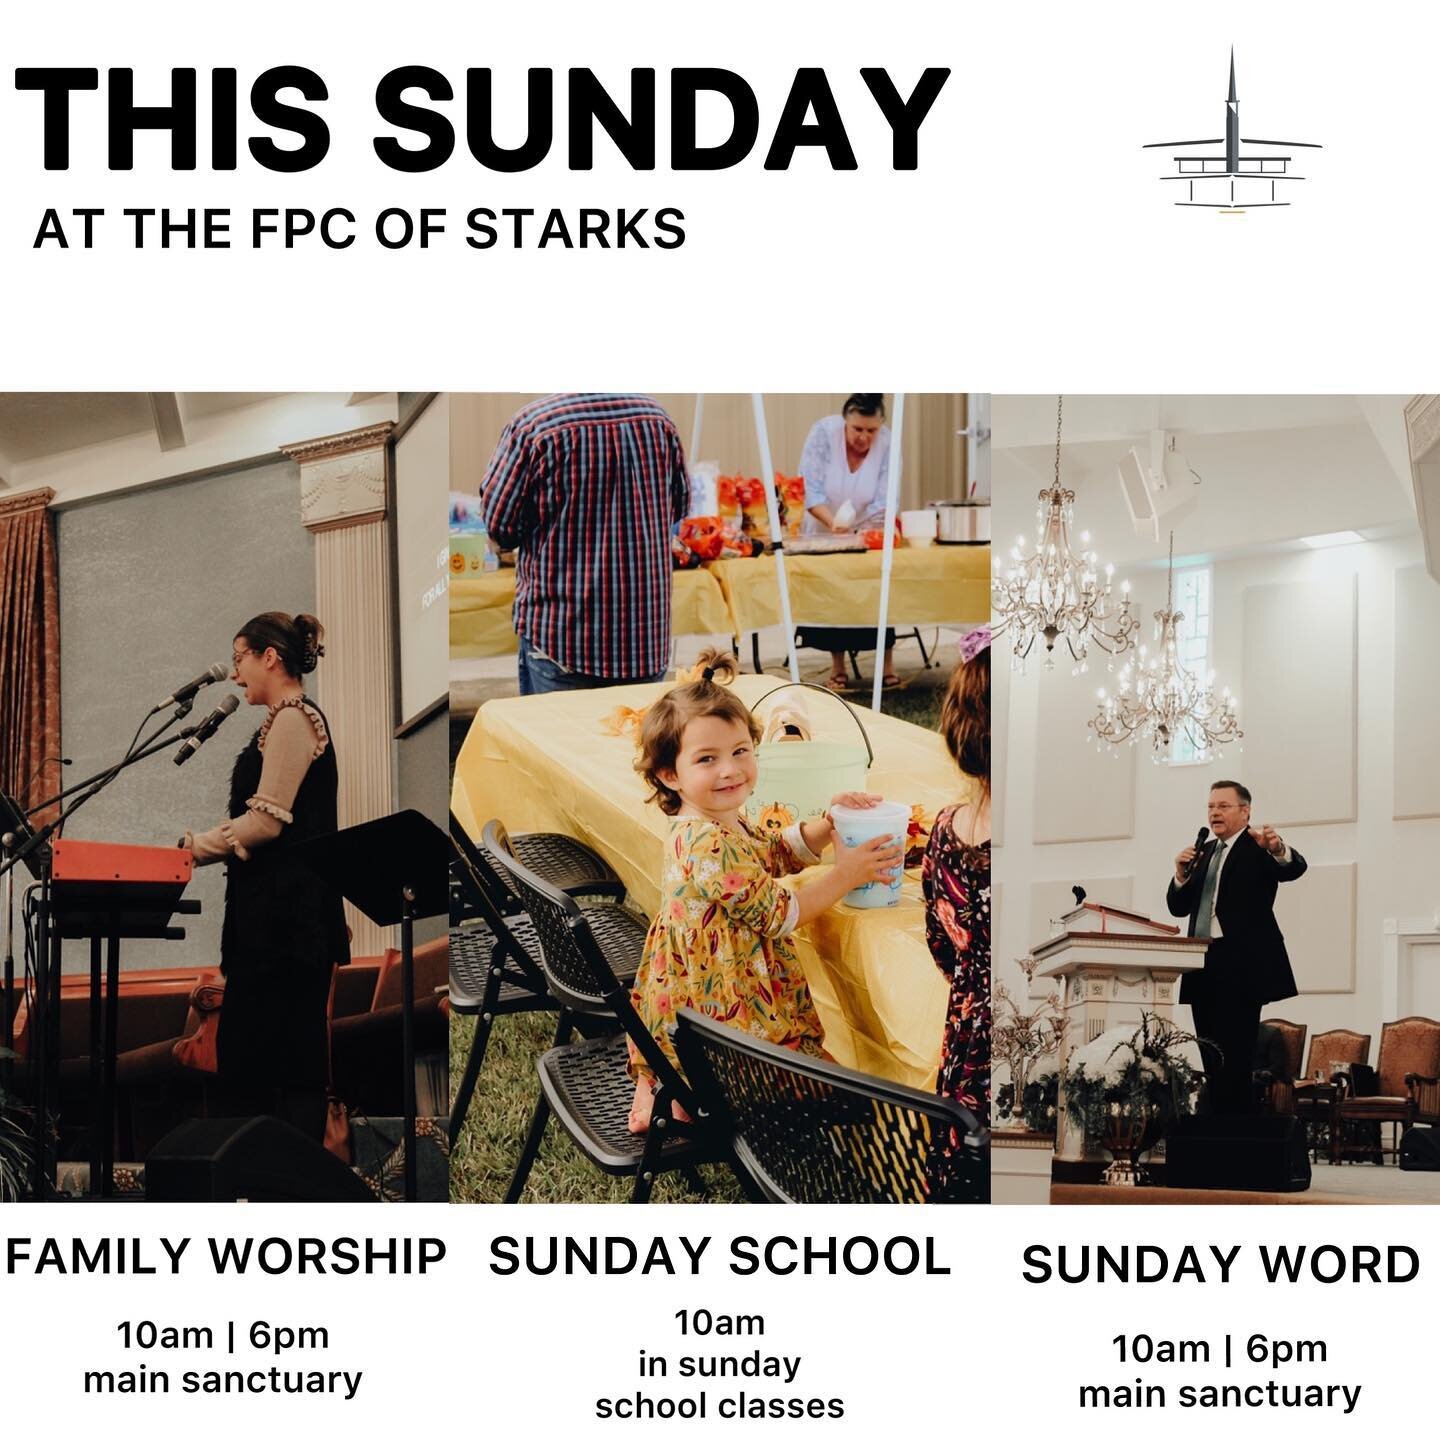 We have a wonderful Sunday planned for tomorrow! Come join us and invite someone to join you!